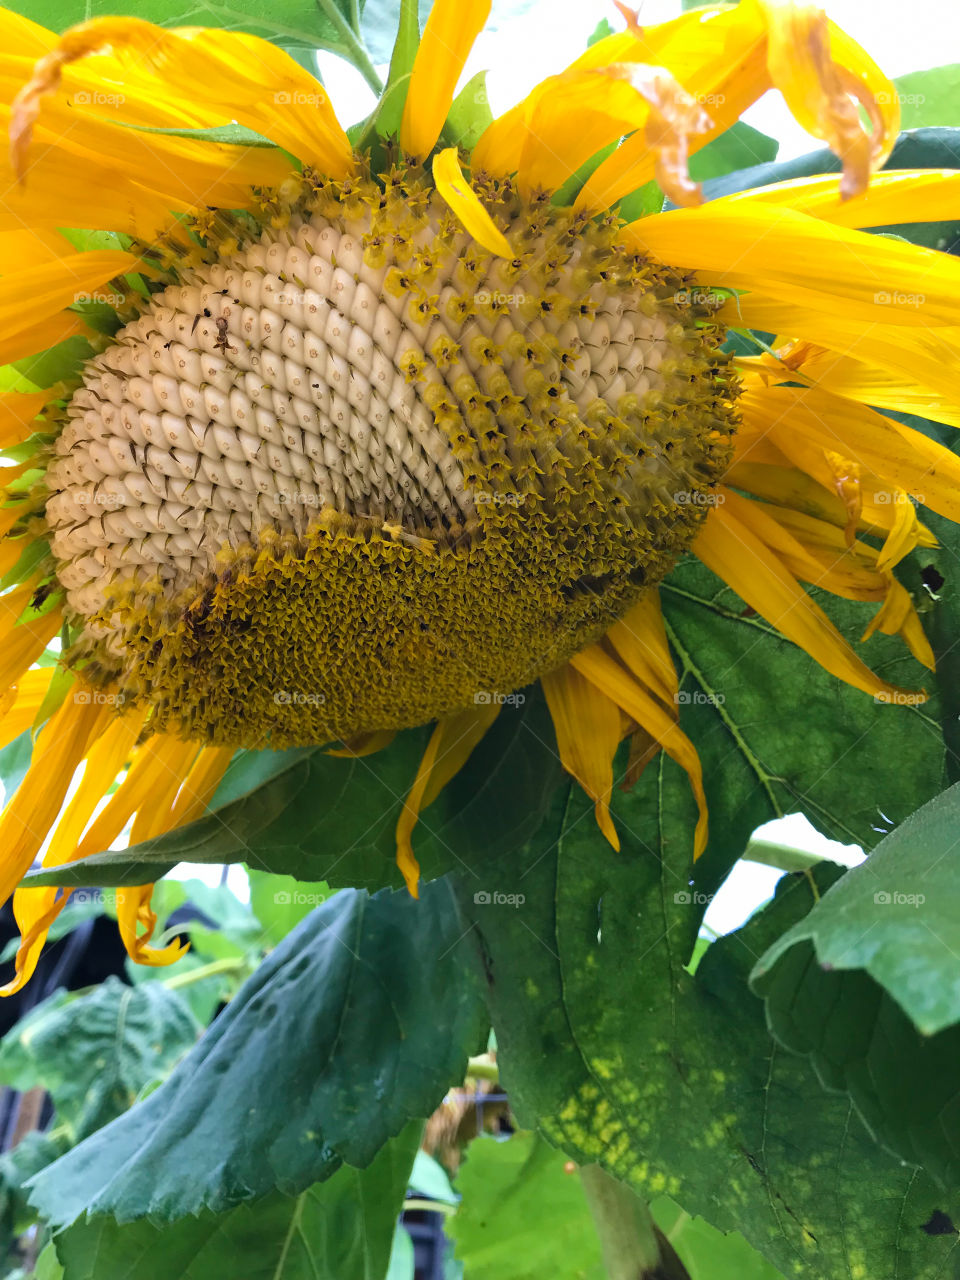 You know autumn is coming when the sunflower heads start to hang down because of the heavy weight of the ripening seeds. Picking will have to be well timed to ensure they don’t ripen too much because then they will be ‘harvested’ by the animals! 🐭